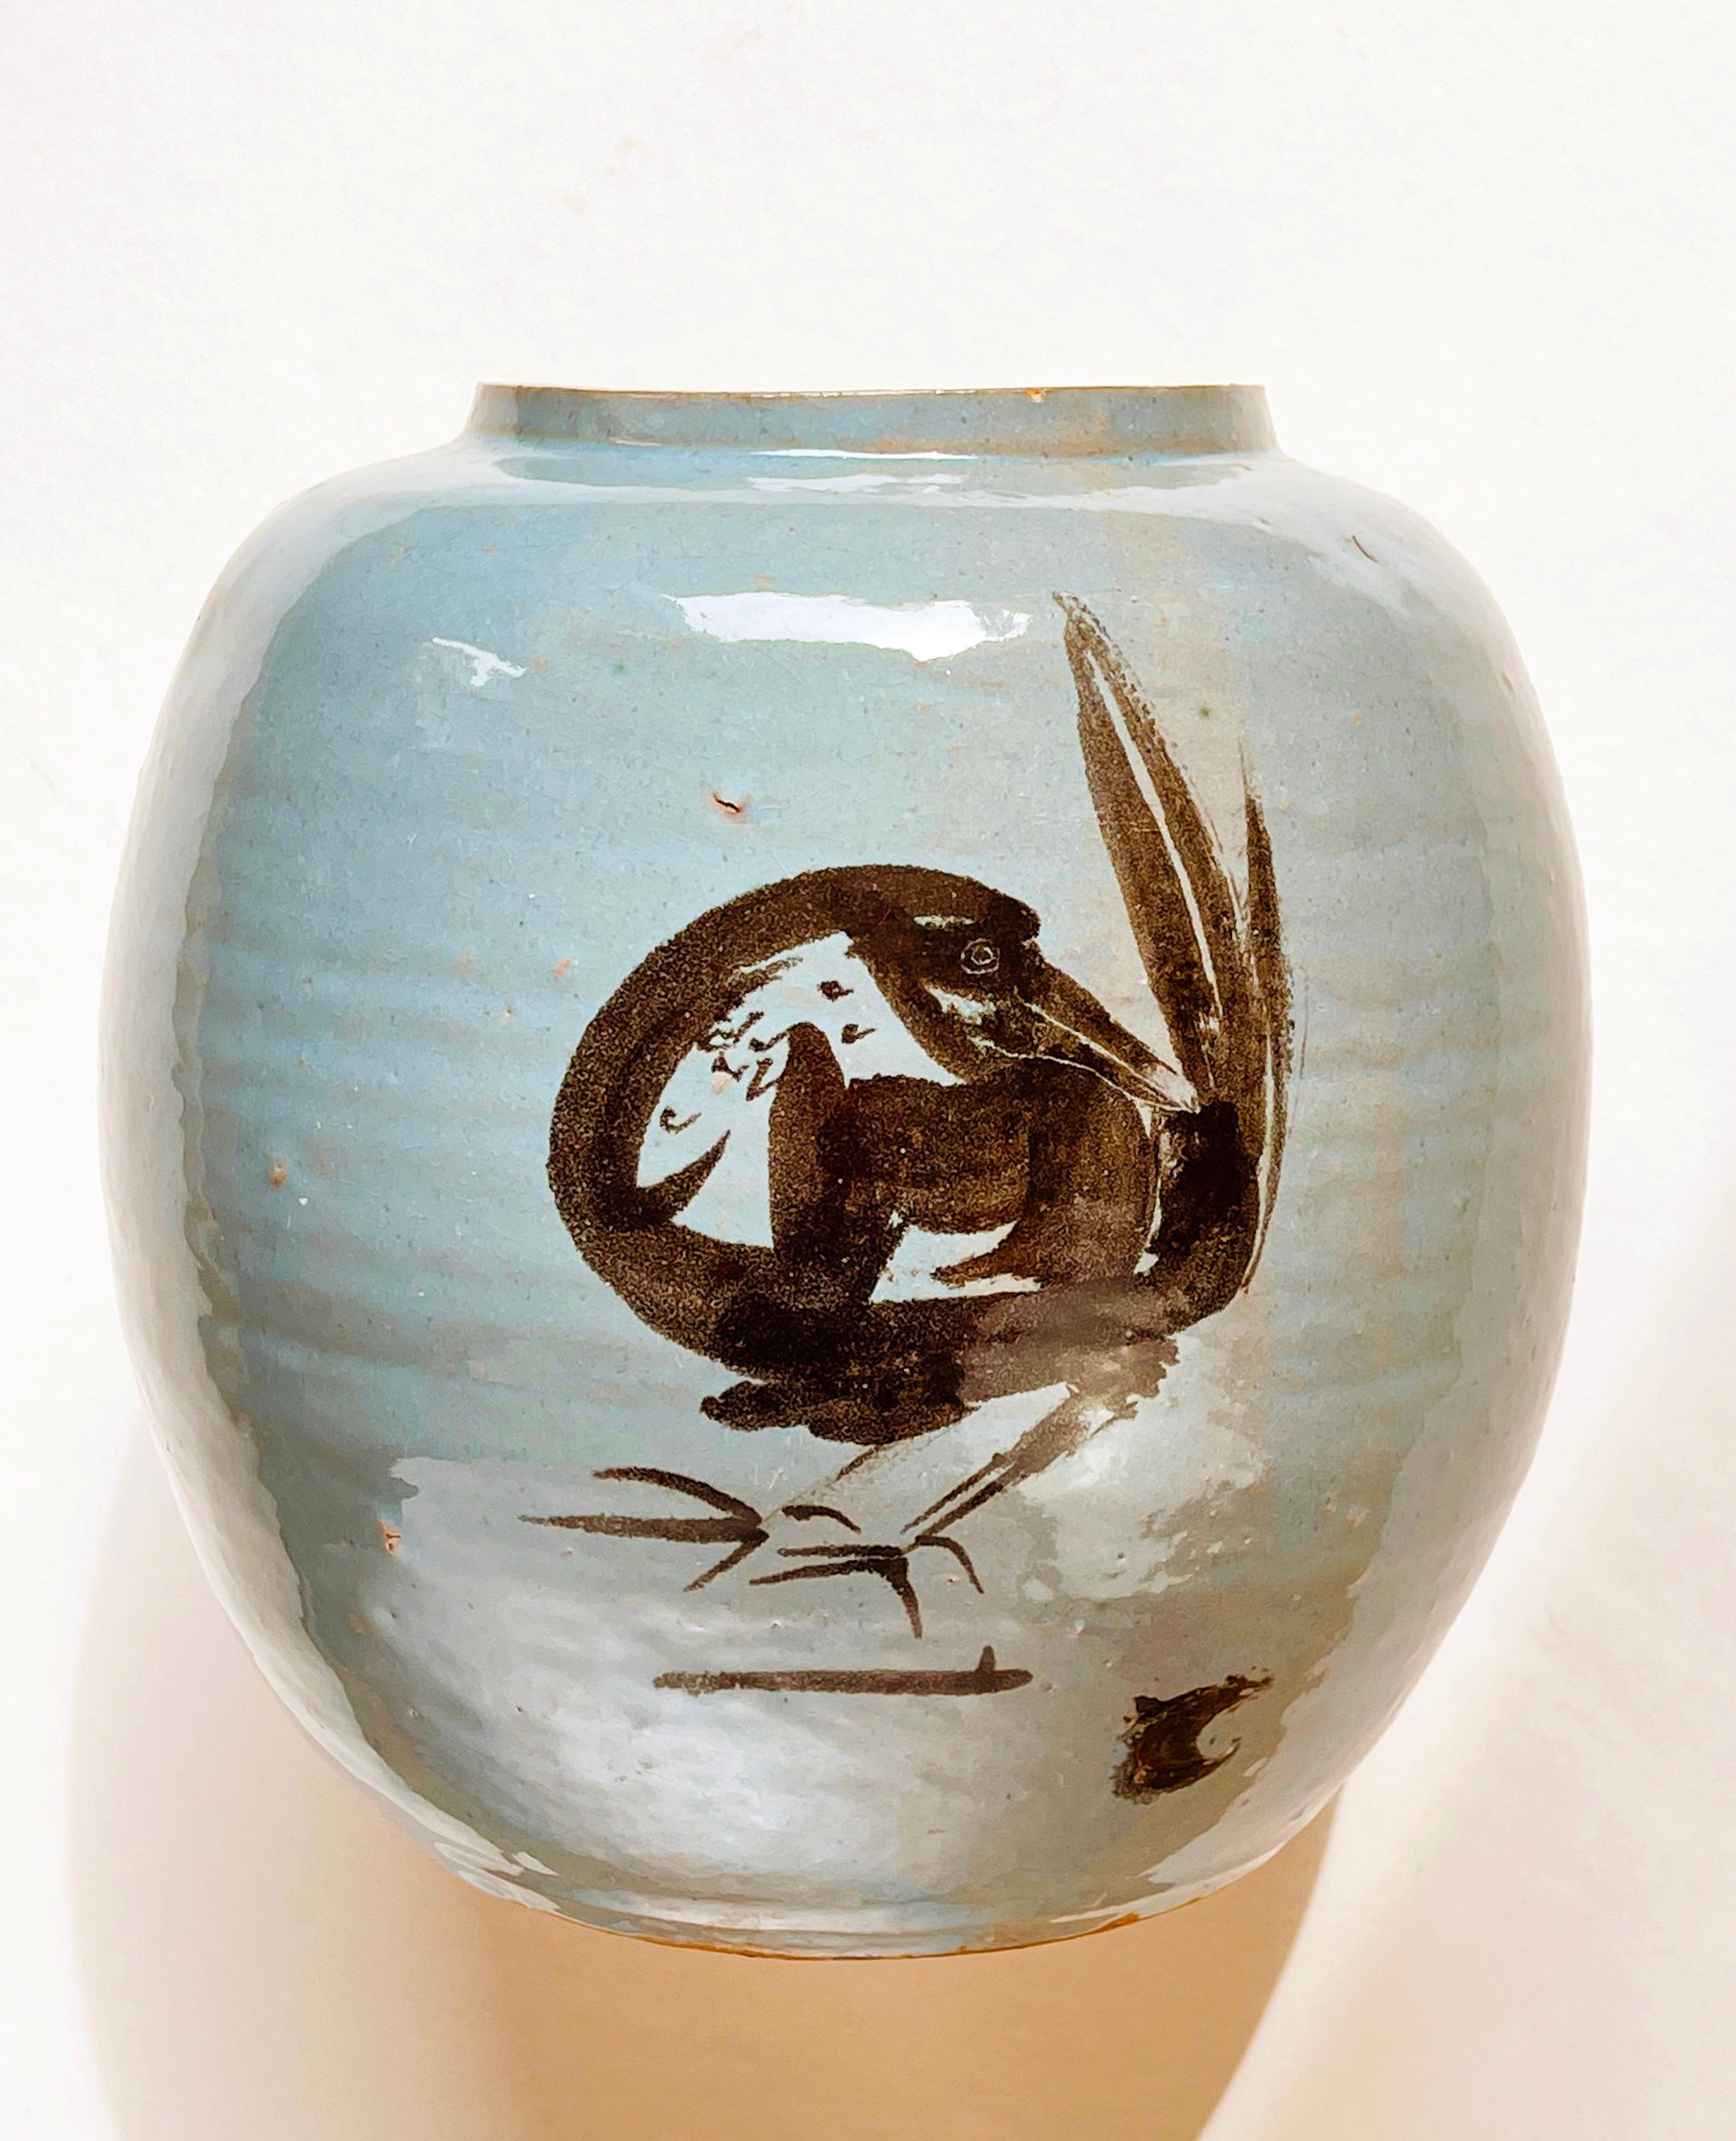 Beautiful, most likely originates in Japan: large round ceramic vase in an eggshell blue to turquoise glaze.
The general style is inspired by the marvellous brush painting style of the Edo period (1603 bis 1868), where all is expressed with just a